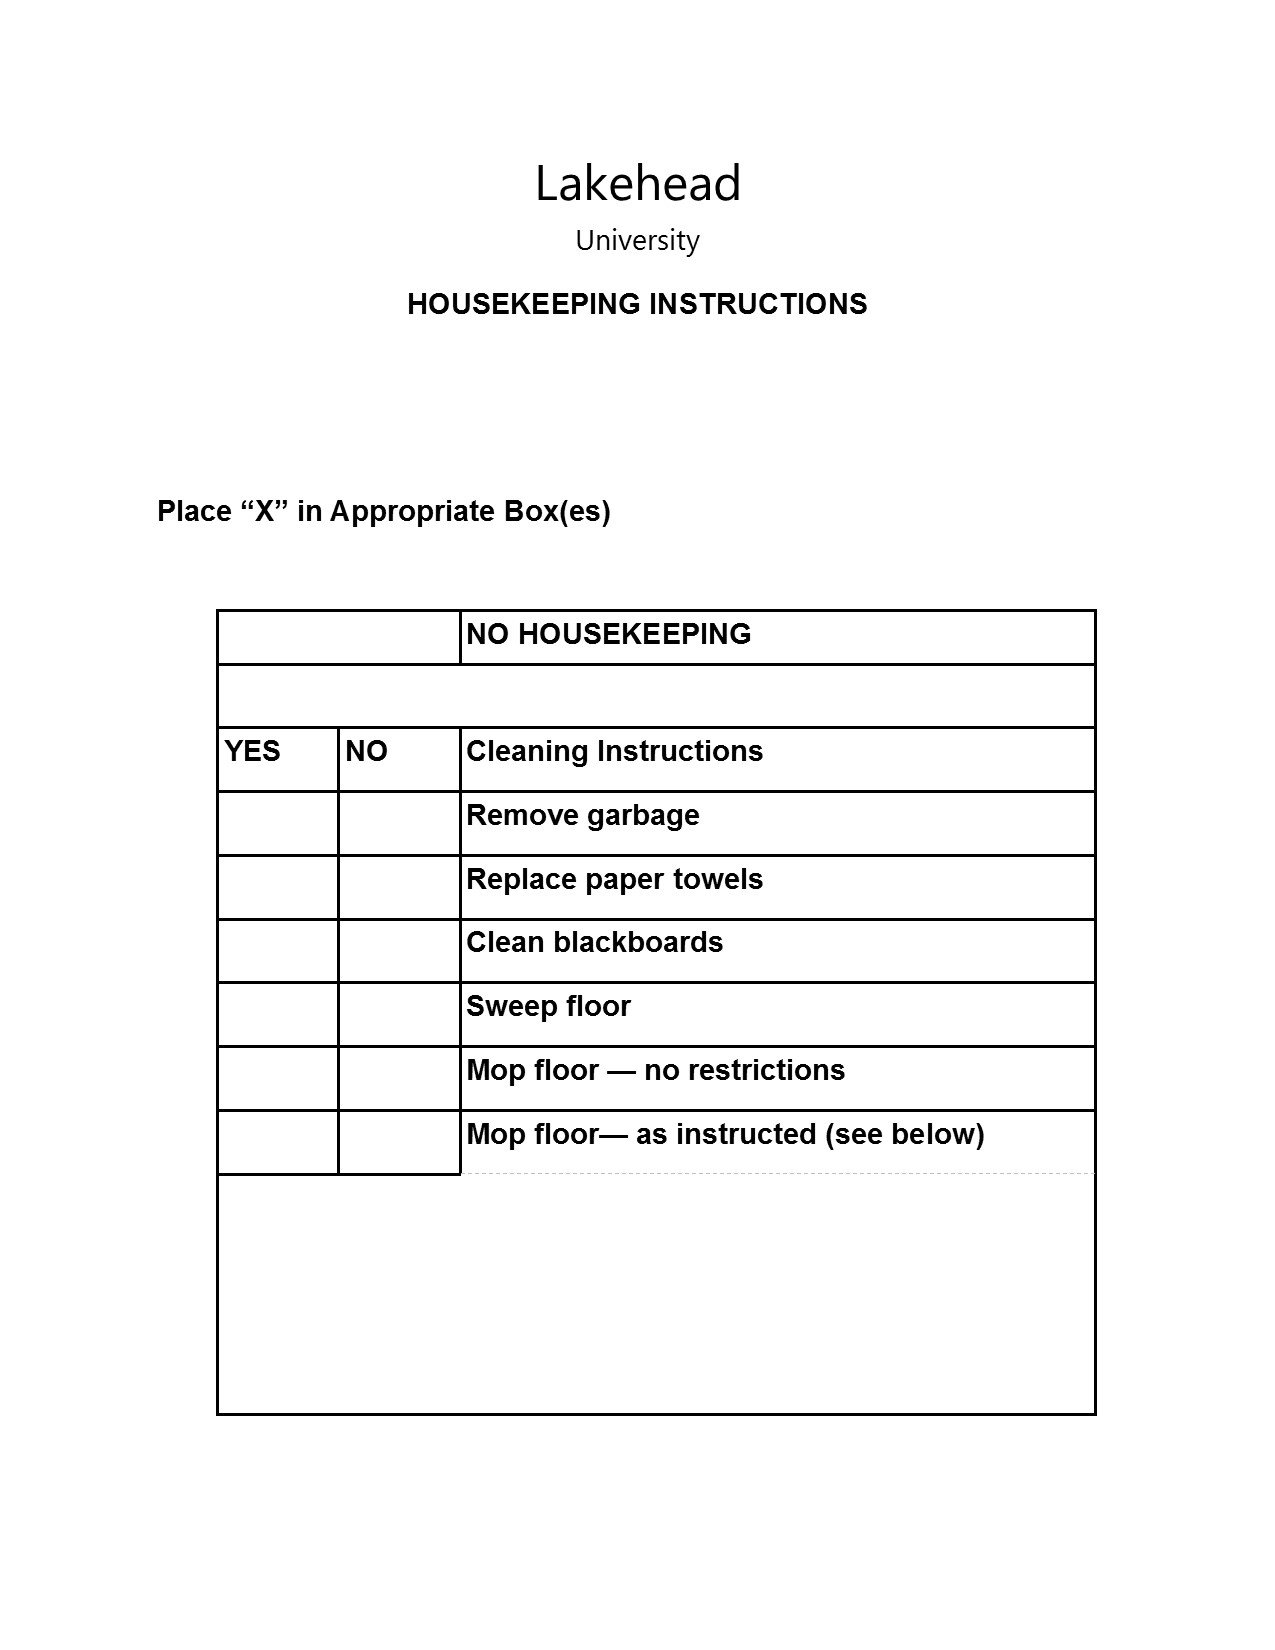 Housekeeper's cleaning instructions for laboratories